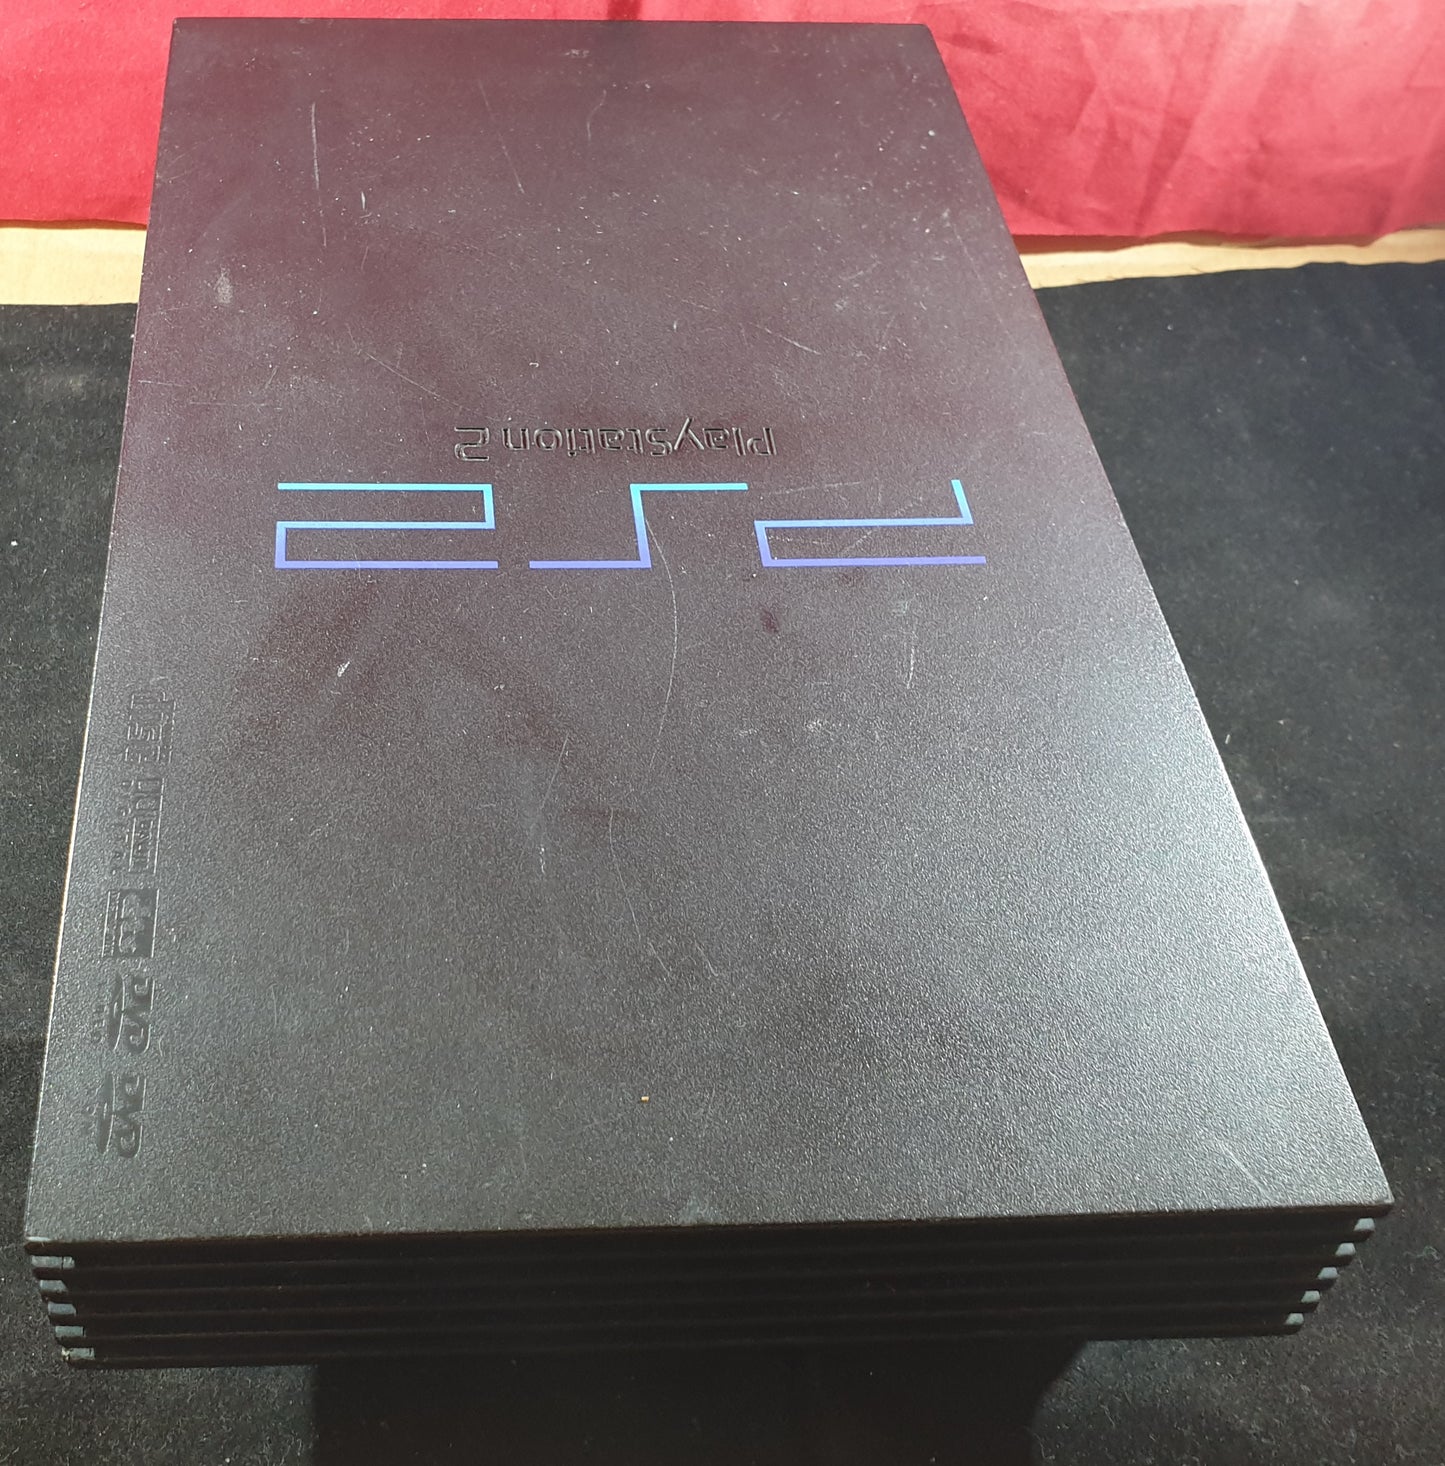 Sony Playstation 2 (PS2) SCPH 50003 Black Console with Unofficial Controller & 1MB Memory Card